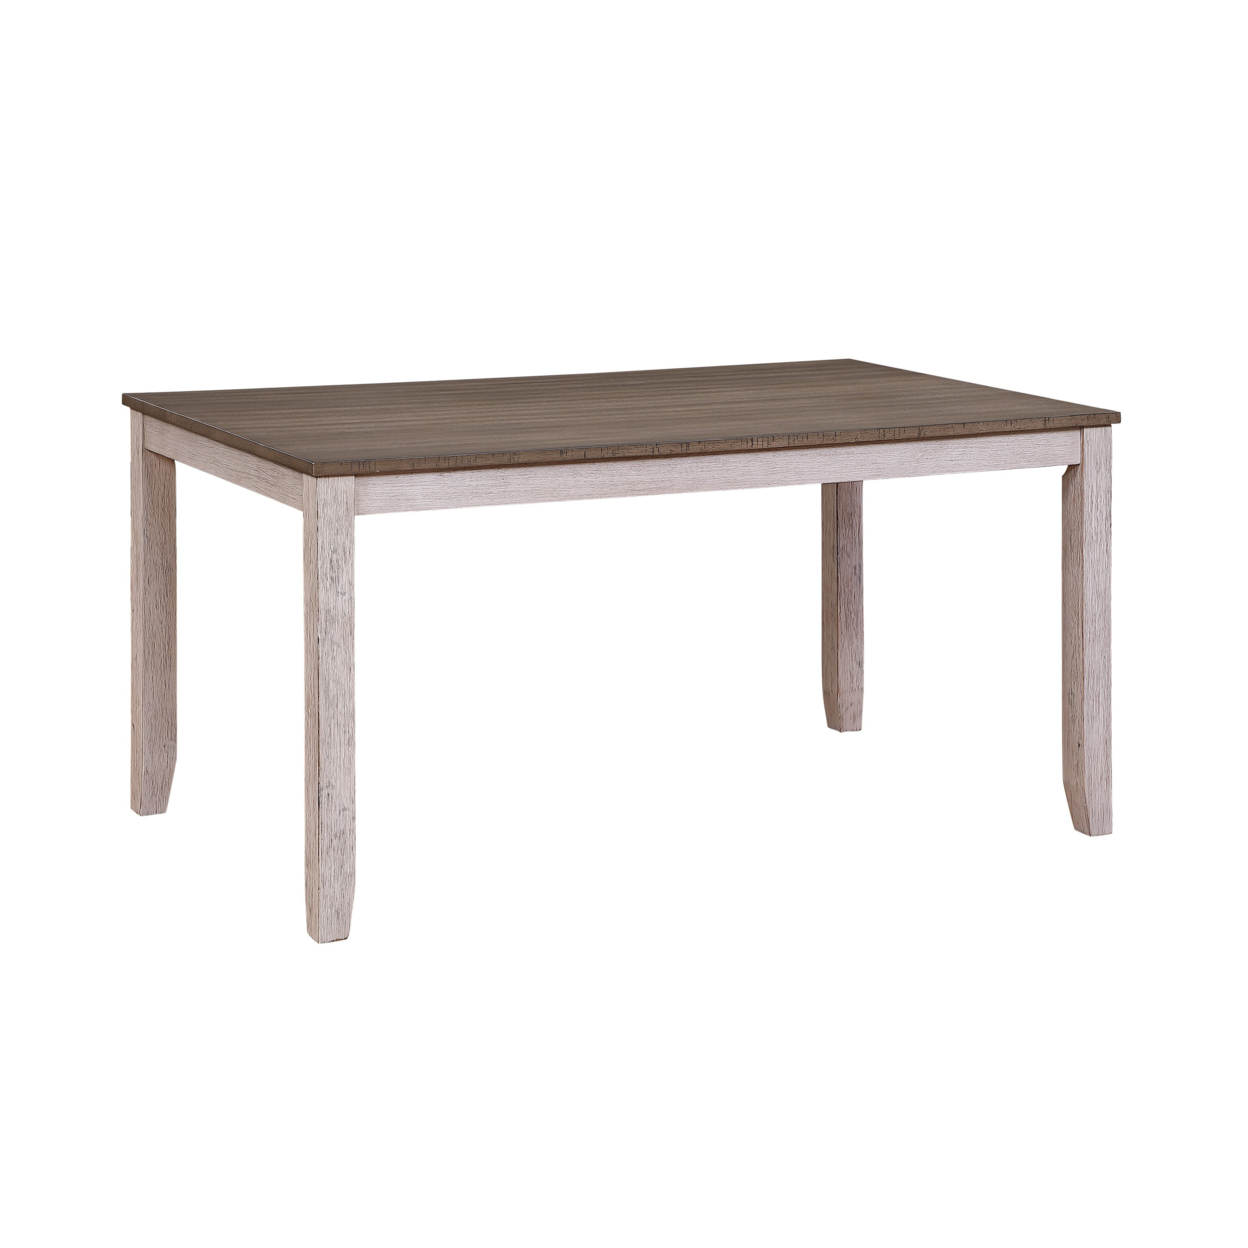 Rectangular Dining Table With Chamfered Legs, Antique White And Brown- Saltoro Sherpi